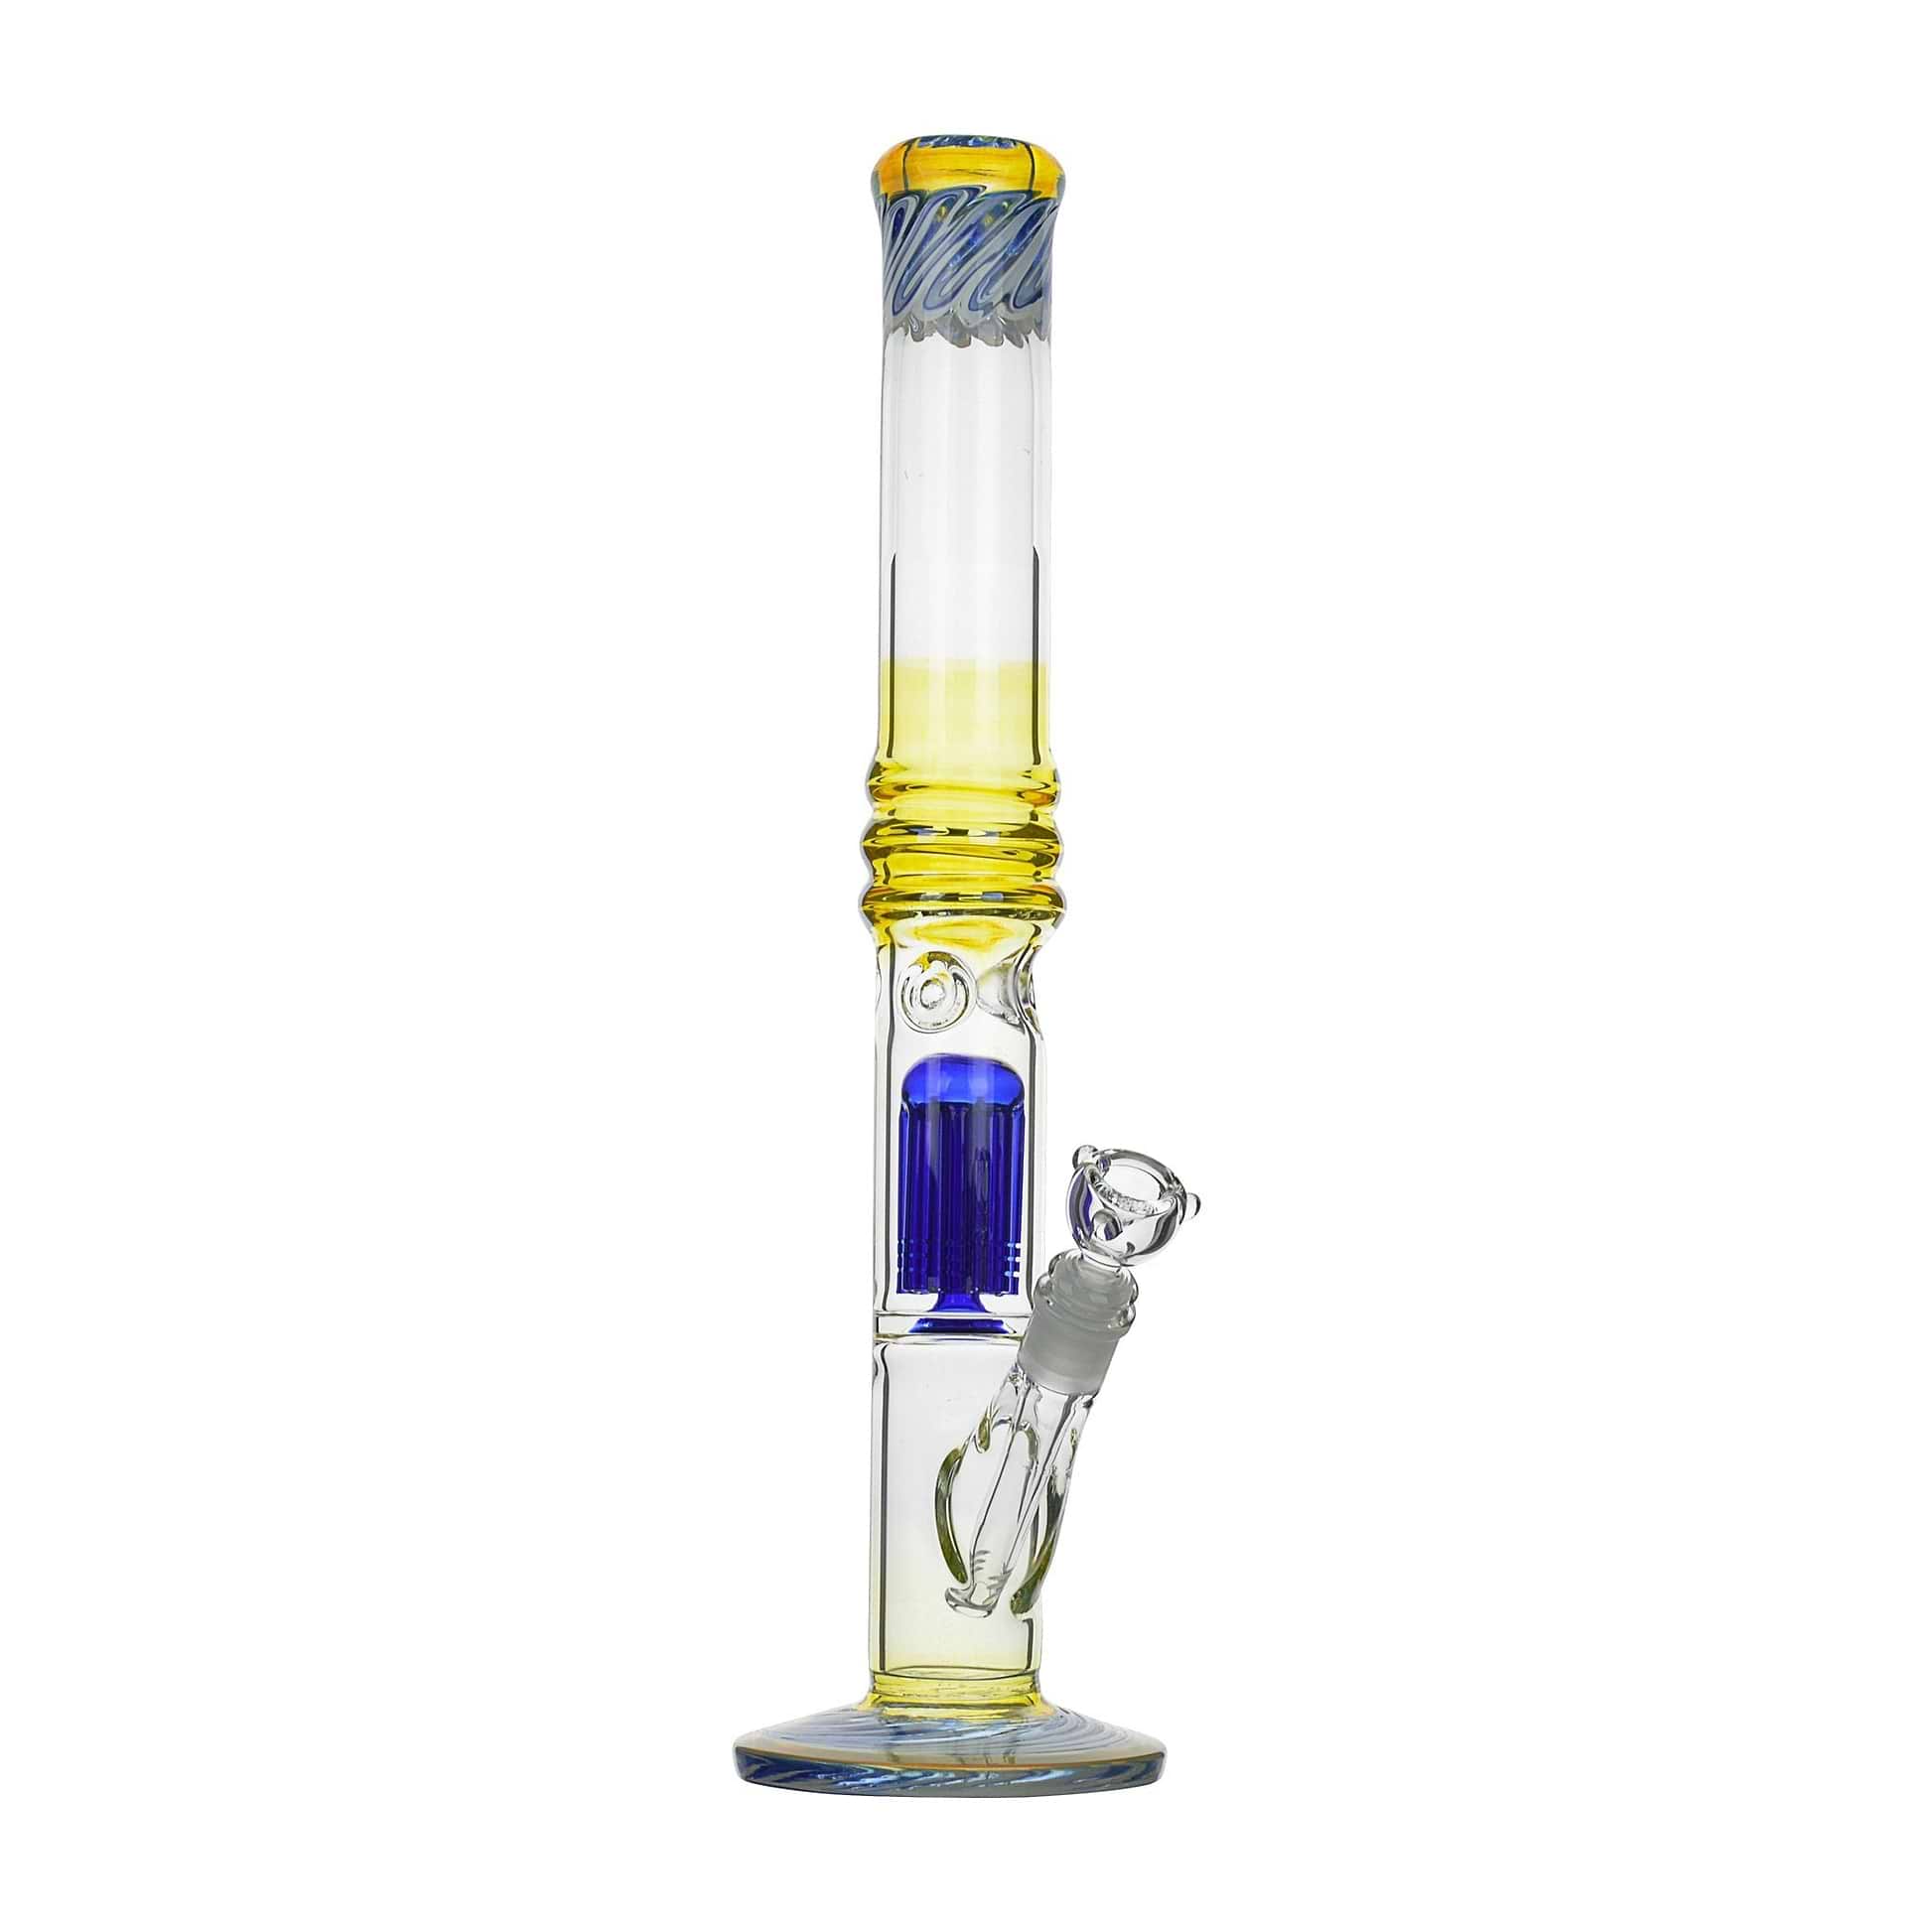 19-inch straight shooter glass bong smoking device body sturdy flat face riptide look swirl design on top with ice catcher